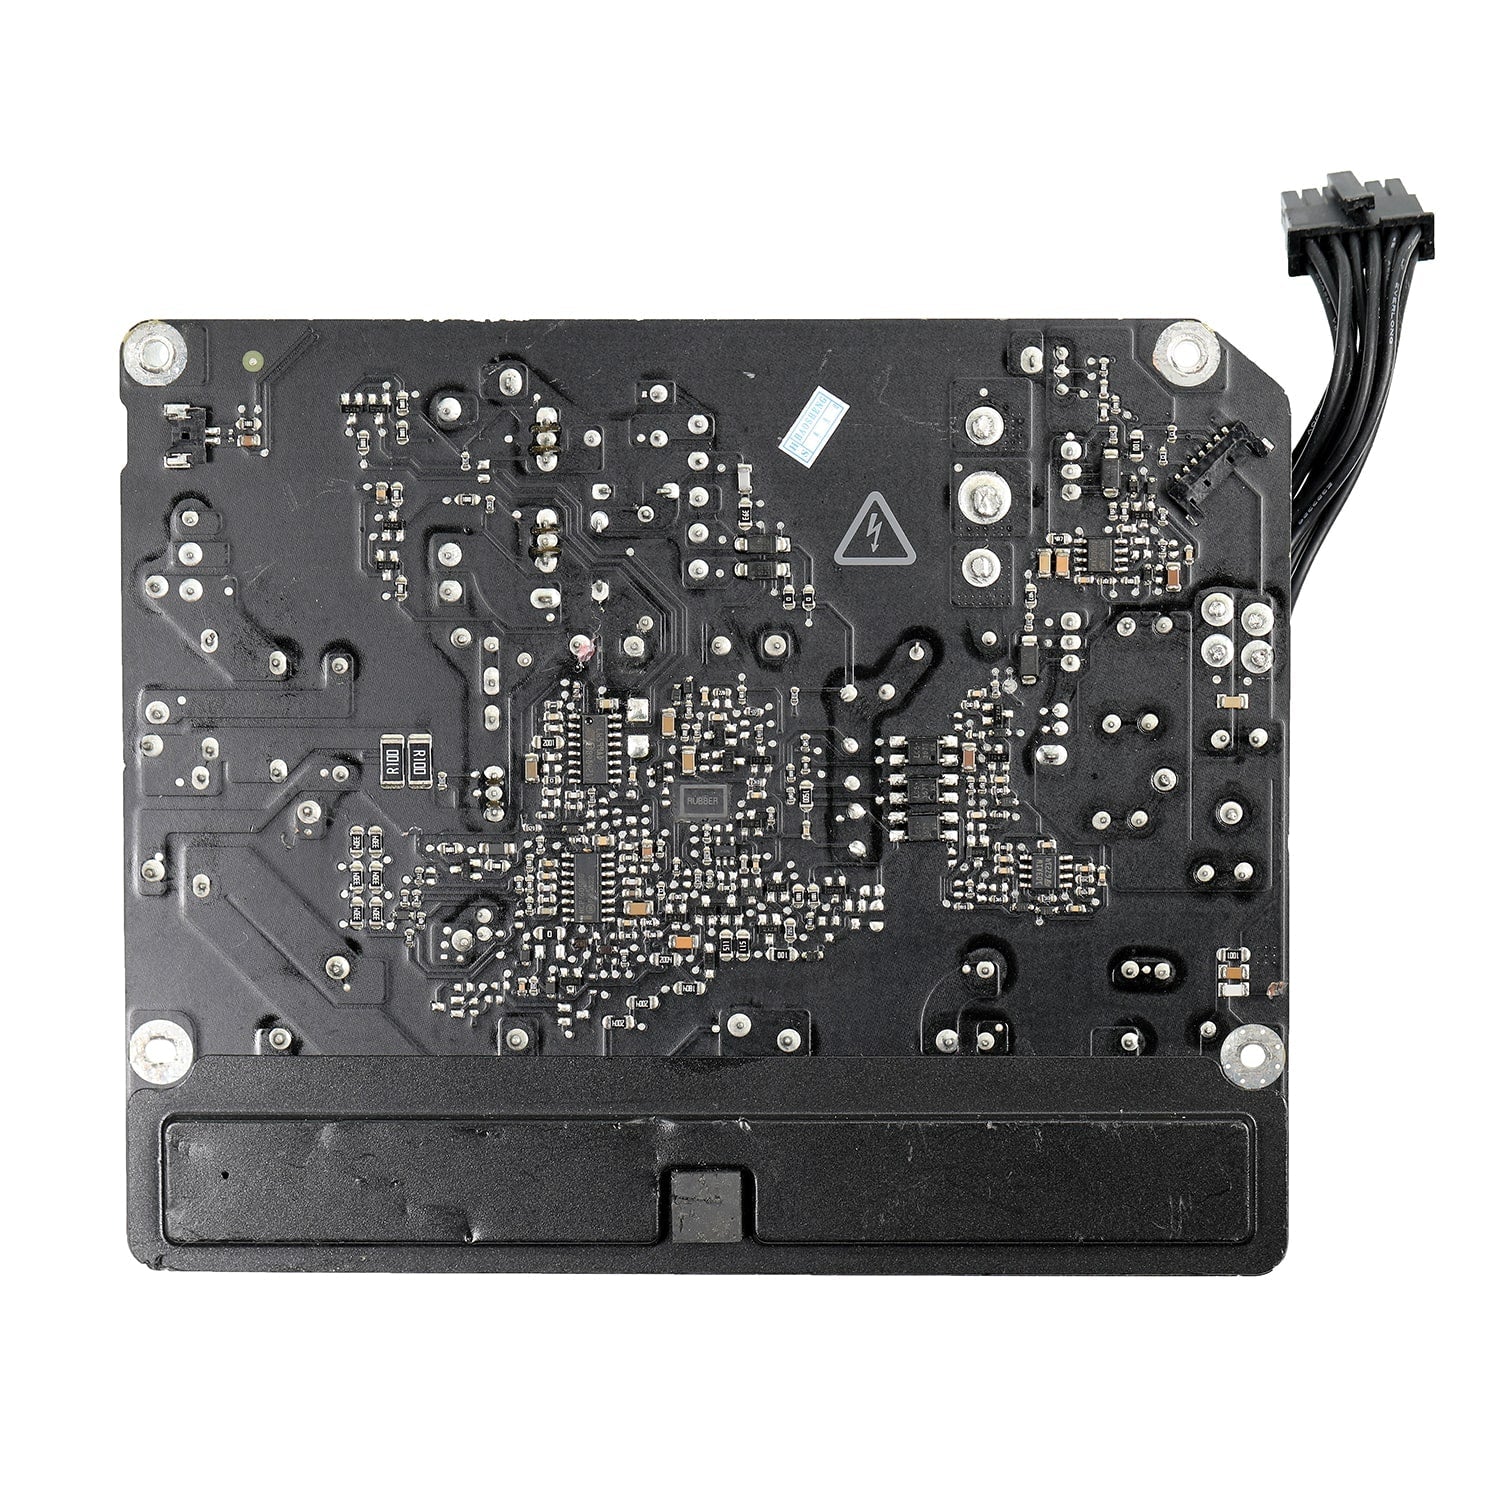 POWER SUPPLY (300W) FOR IMAC 27" A1419 (LATE 2012)